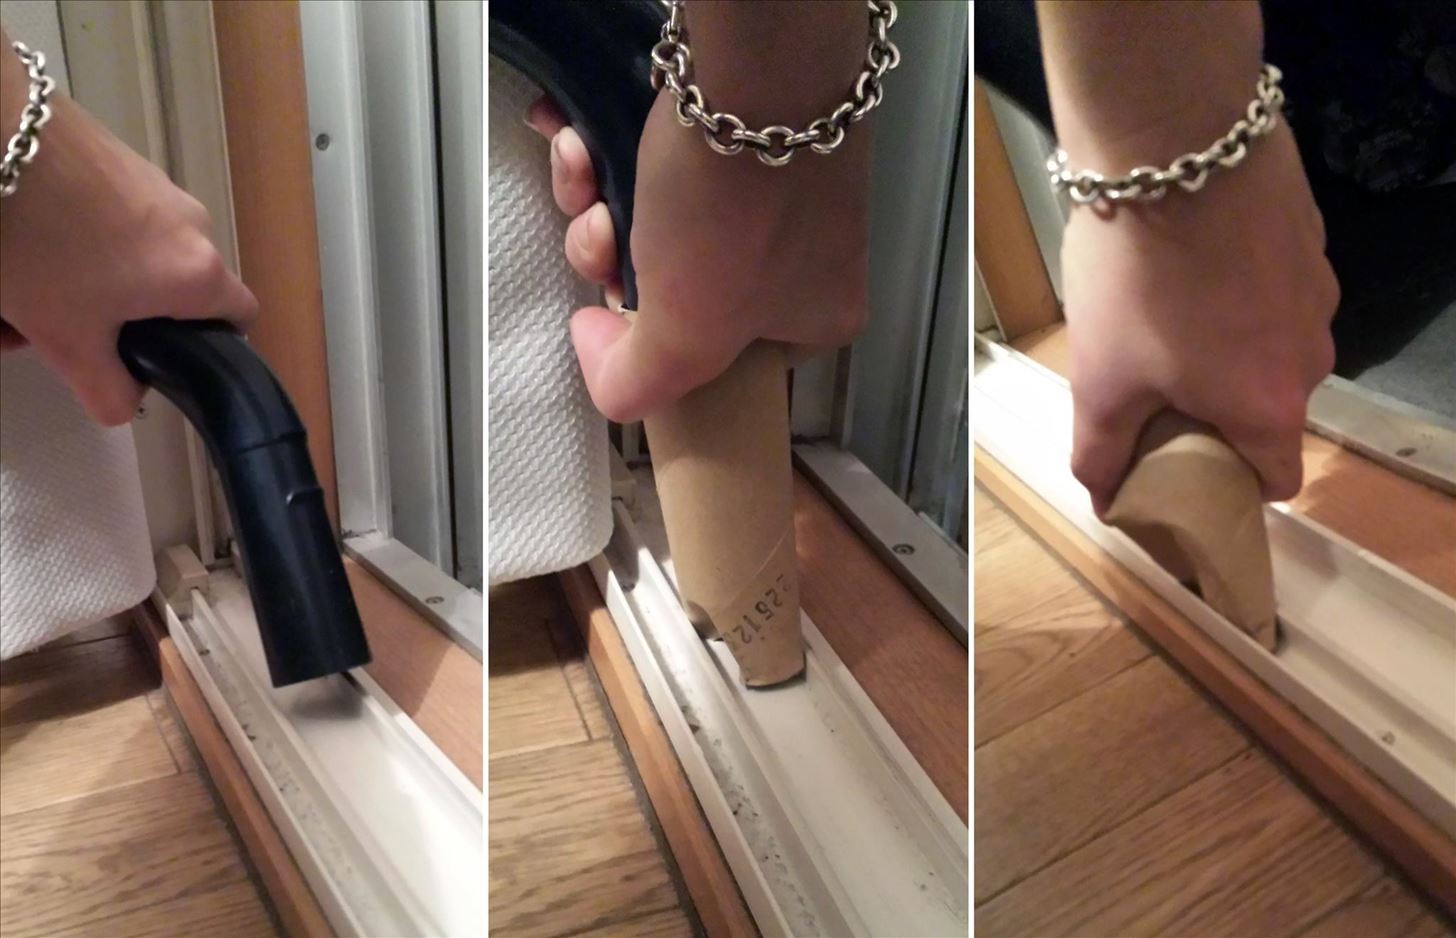 Use Those 'Useless' Leftover Toilet Paper Tubes to Clean in Tight Spots